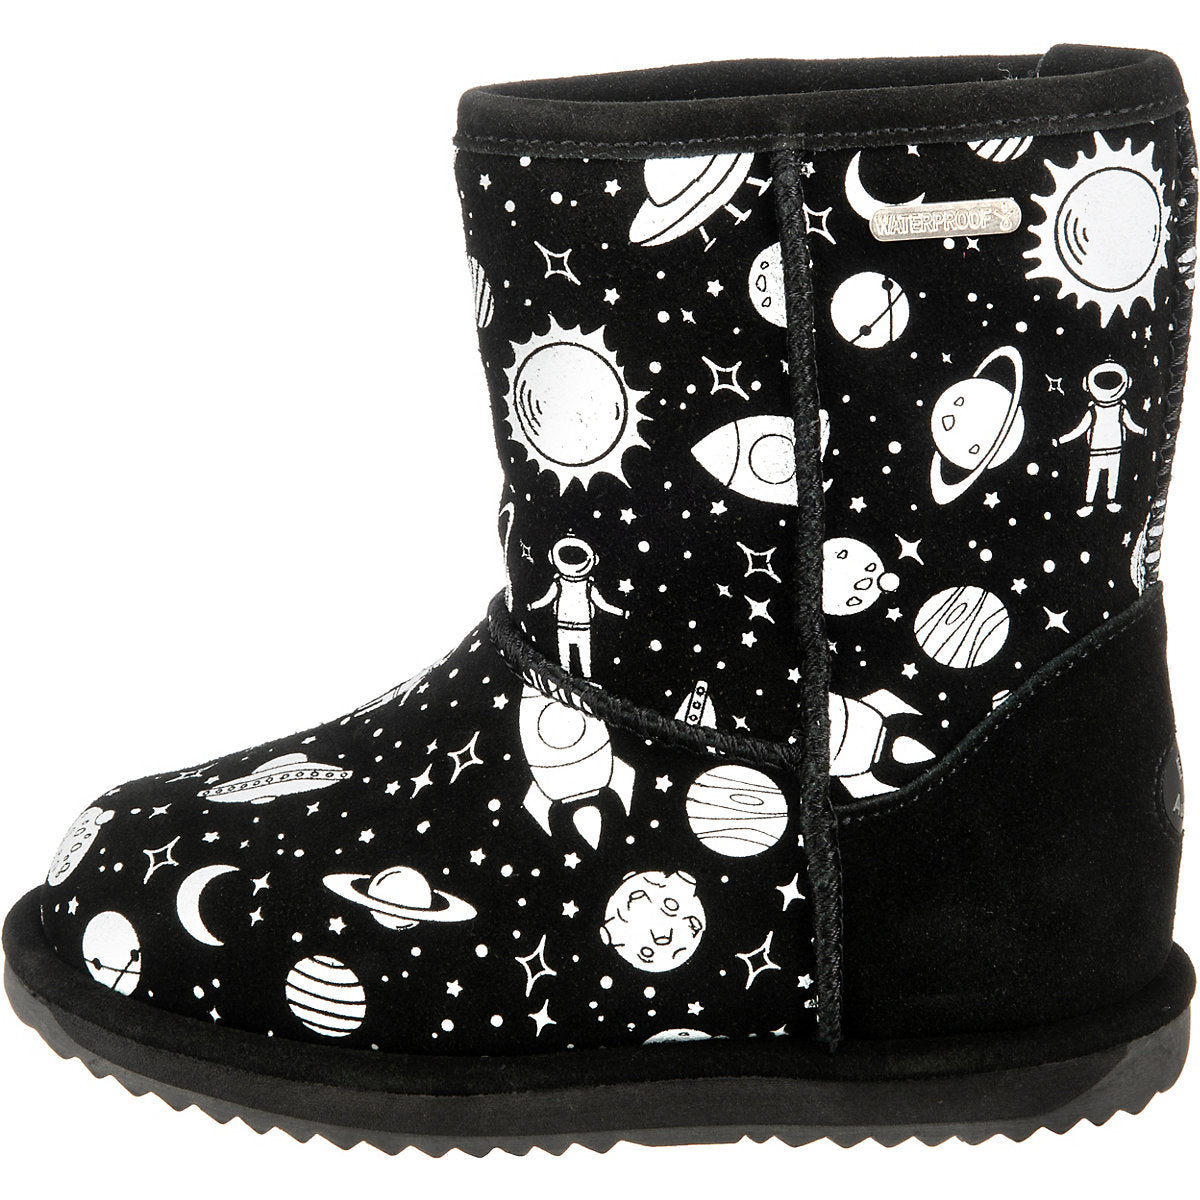 EMU Australia - Outer Space Brumby - Black